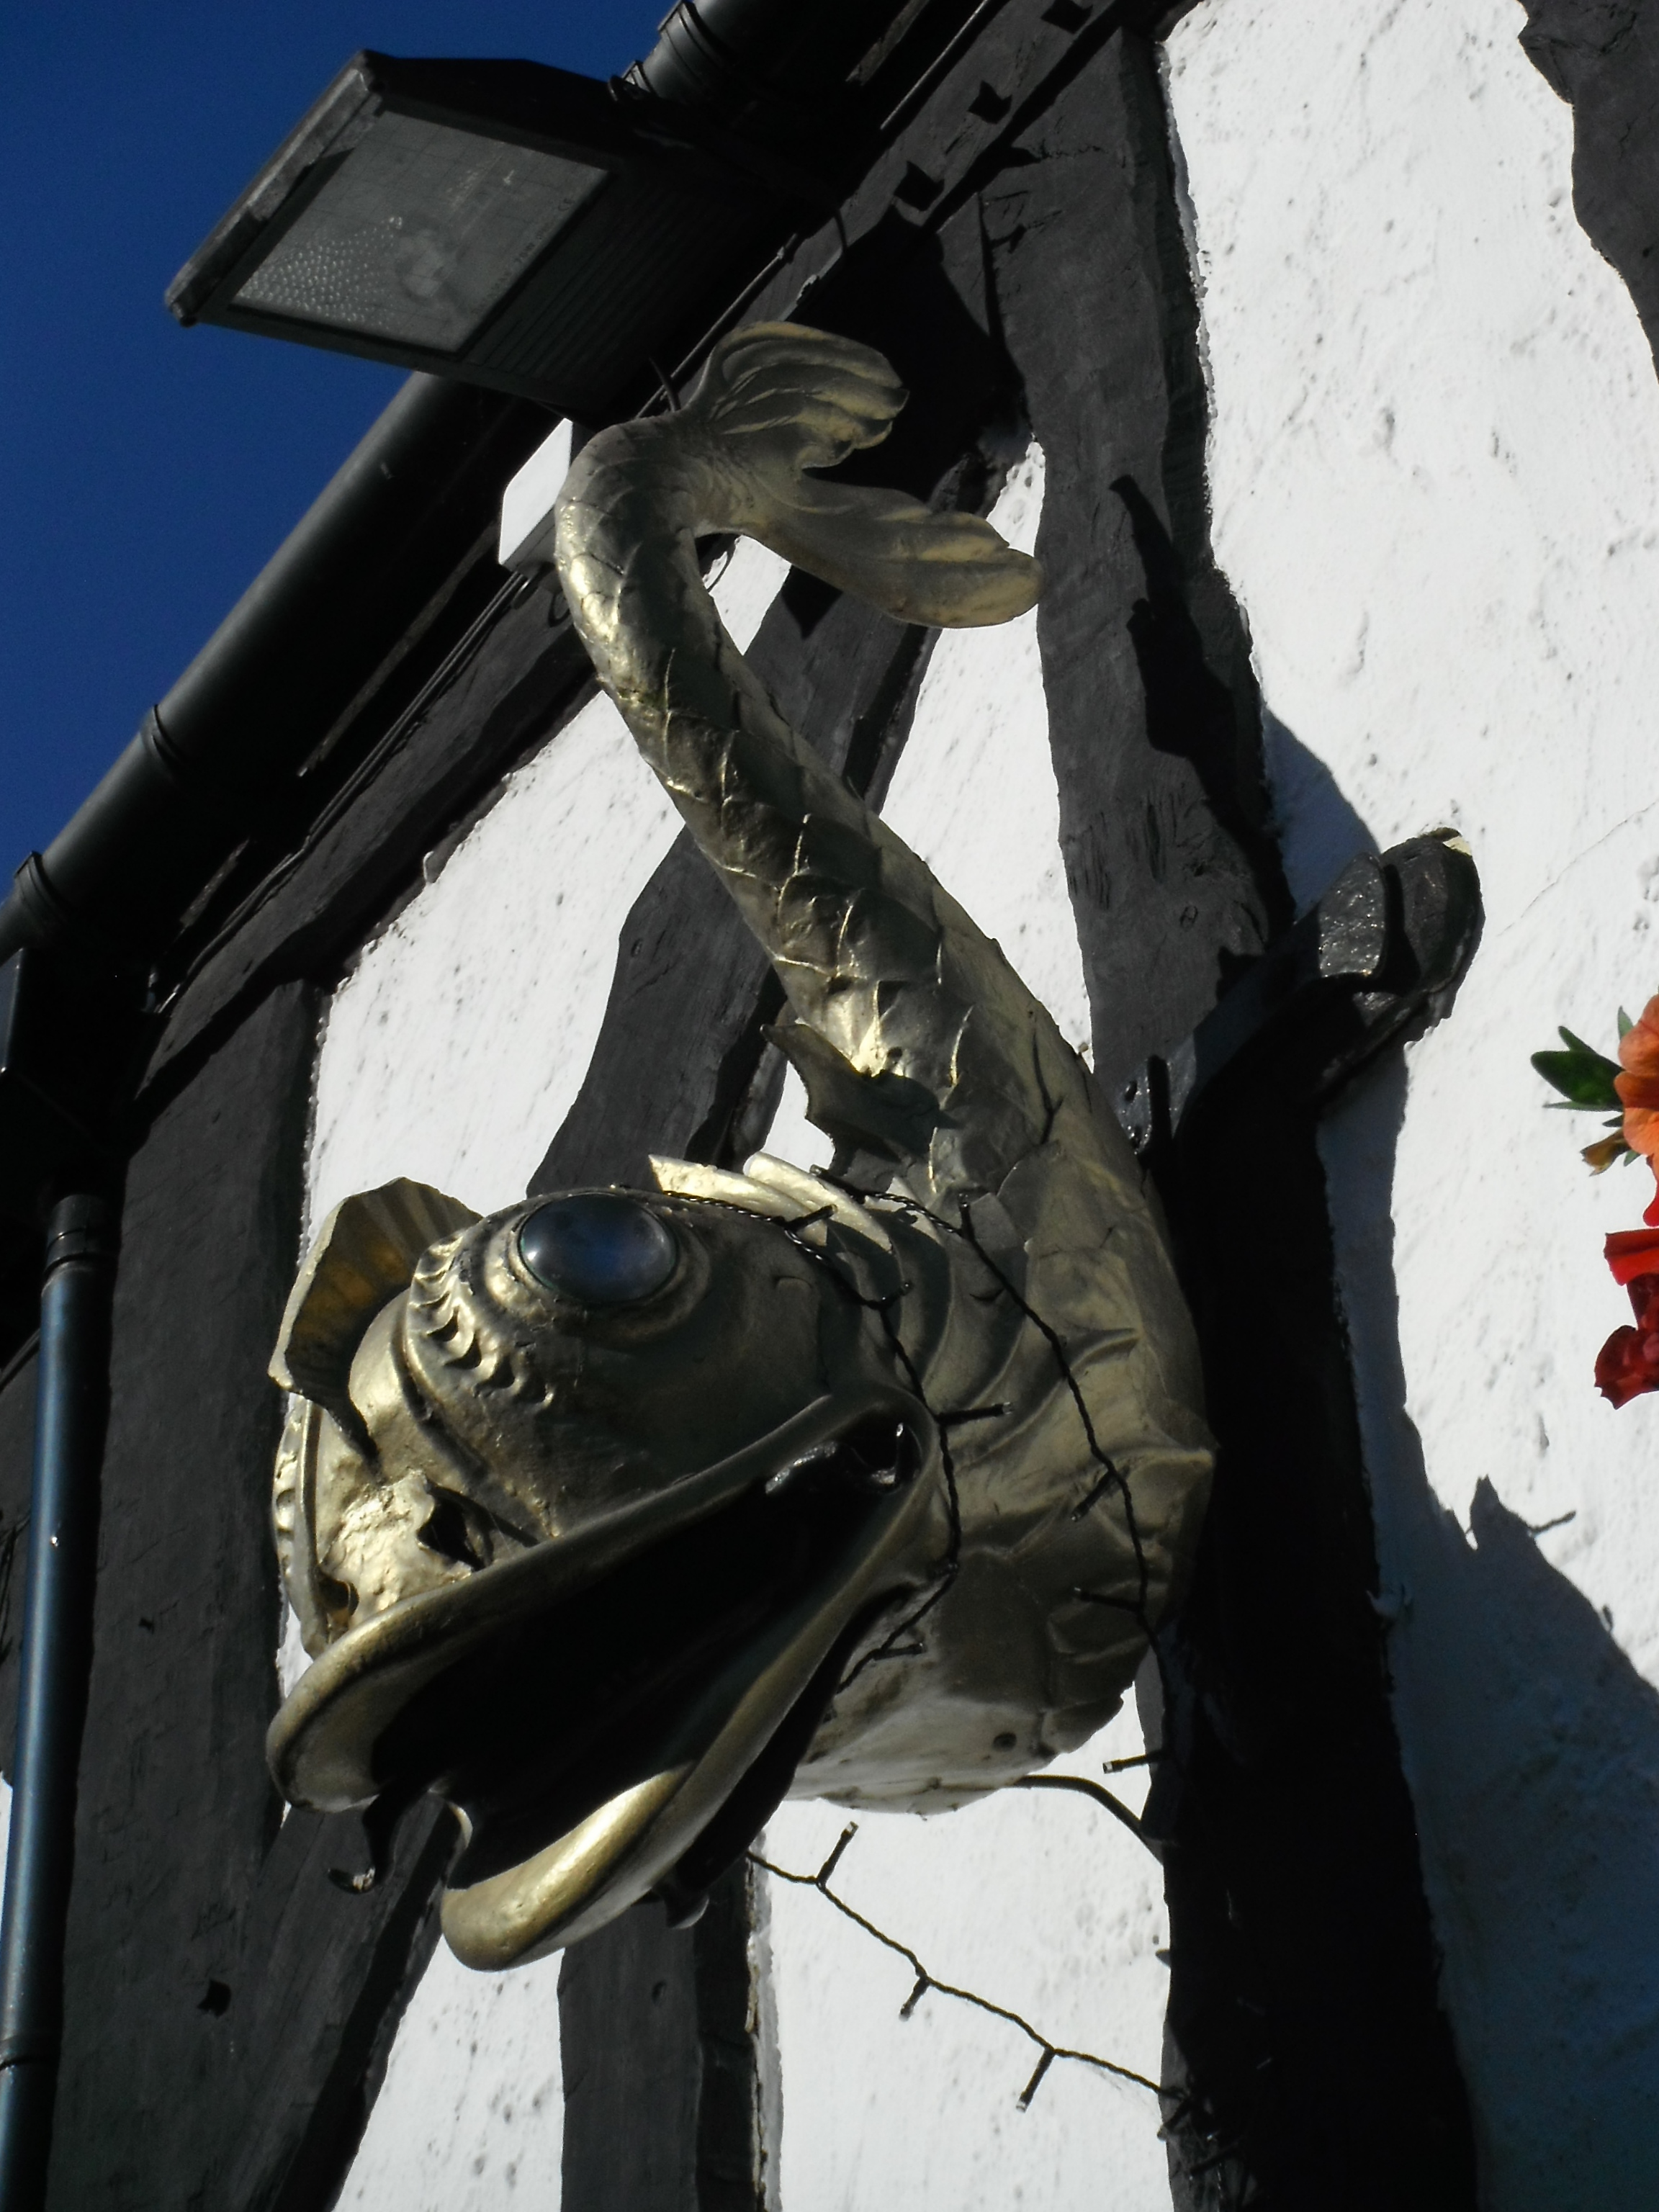 Photo taken by me – the pub sign for Ye Olde Dolphin Inn Derby